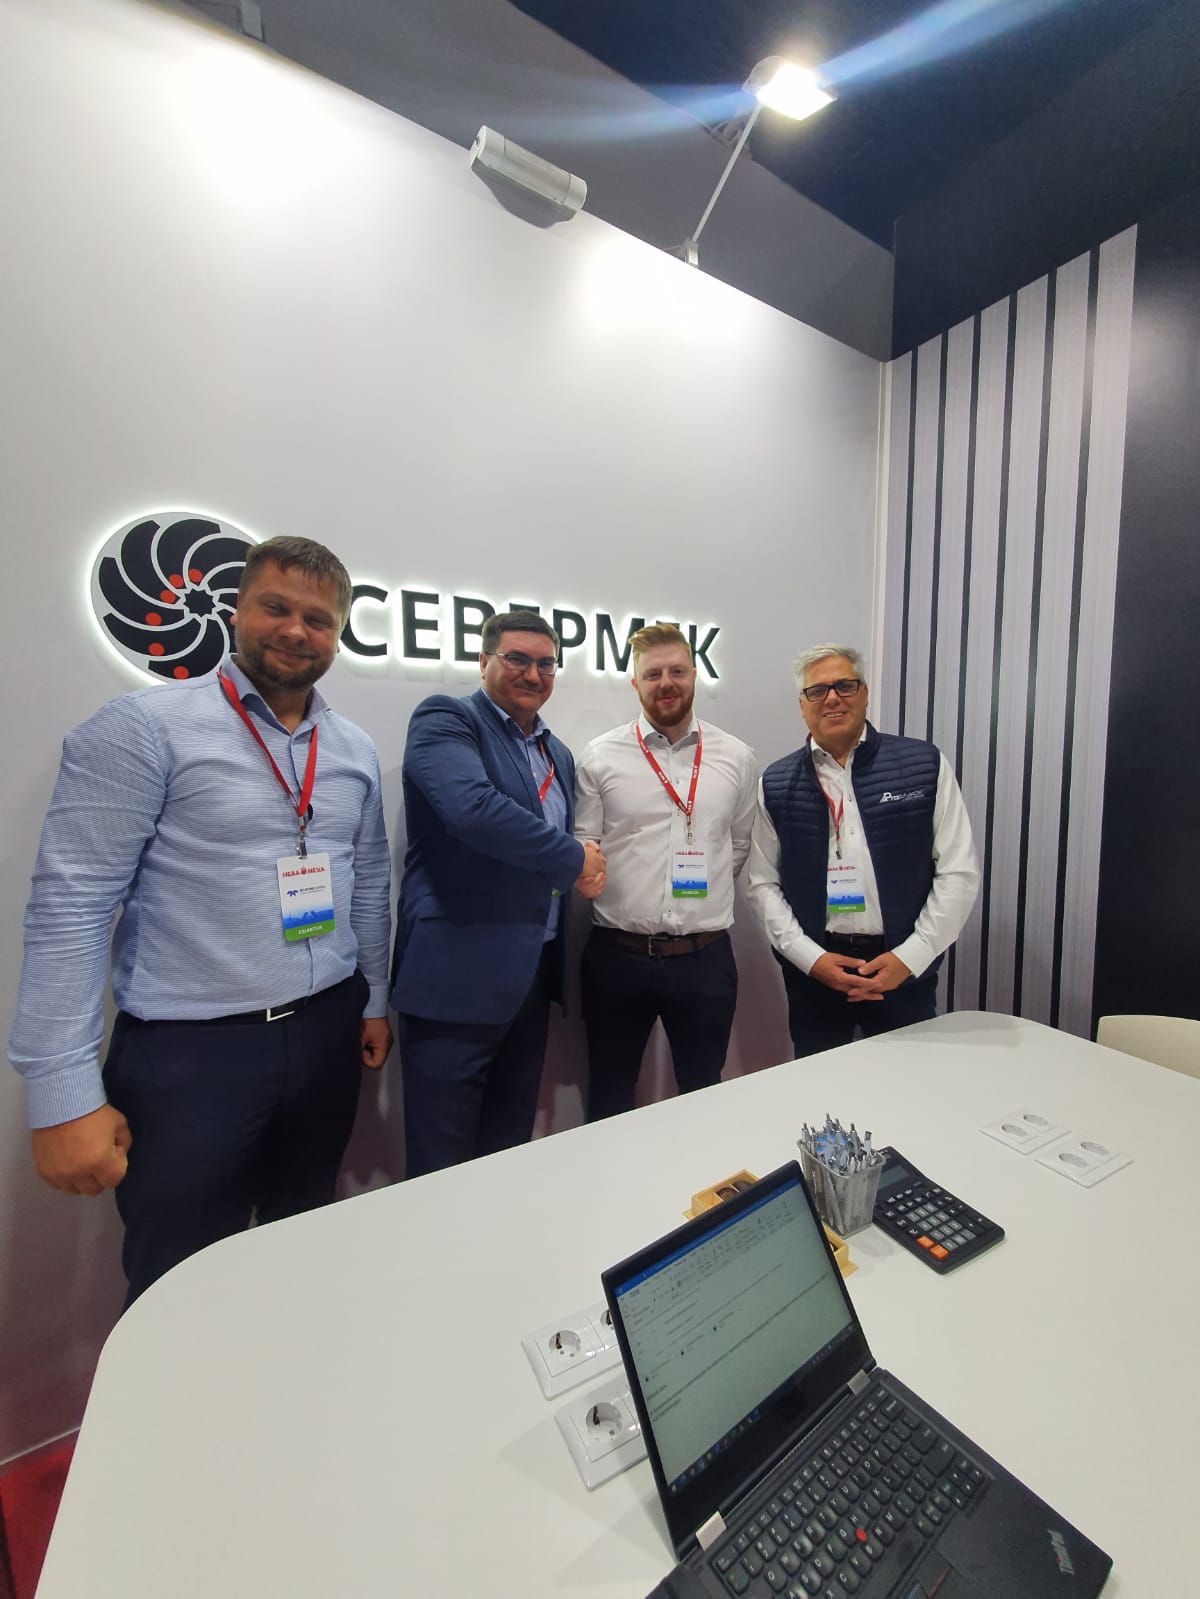 The ProStack partnership with Severmek was launched at the Neva Exhibition in St Petersburg